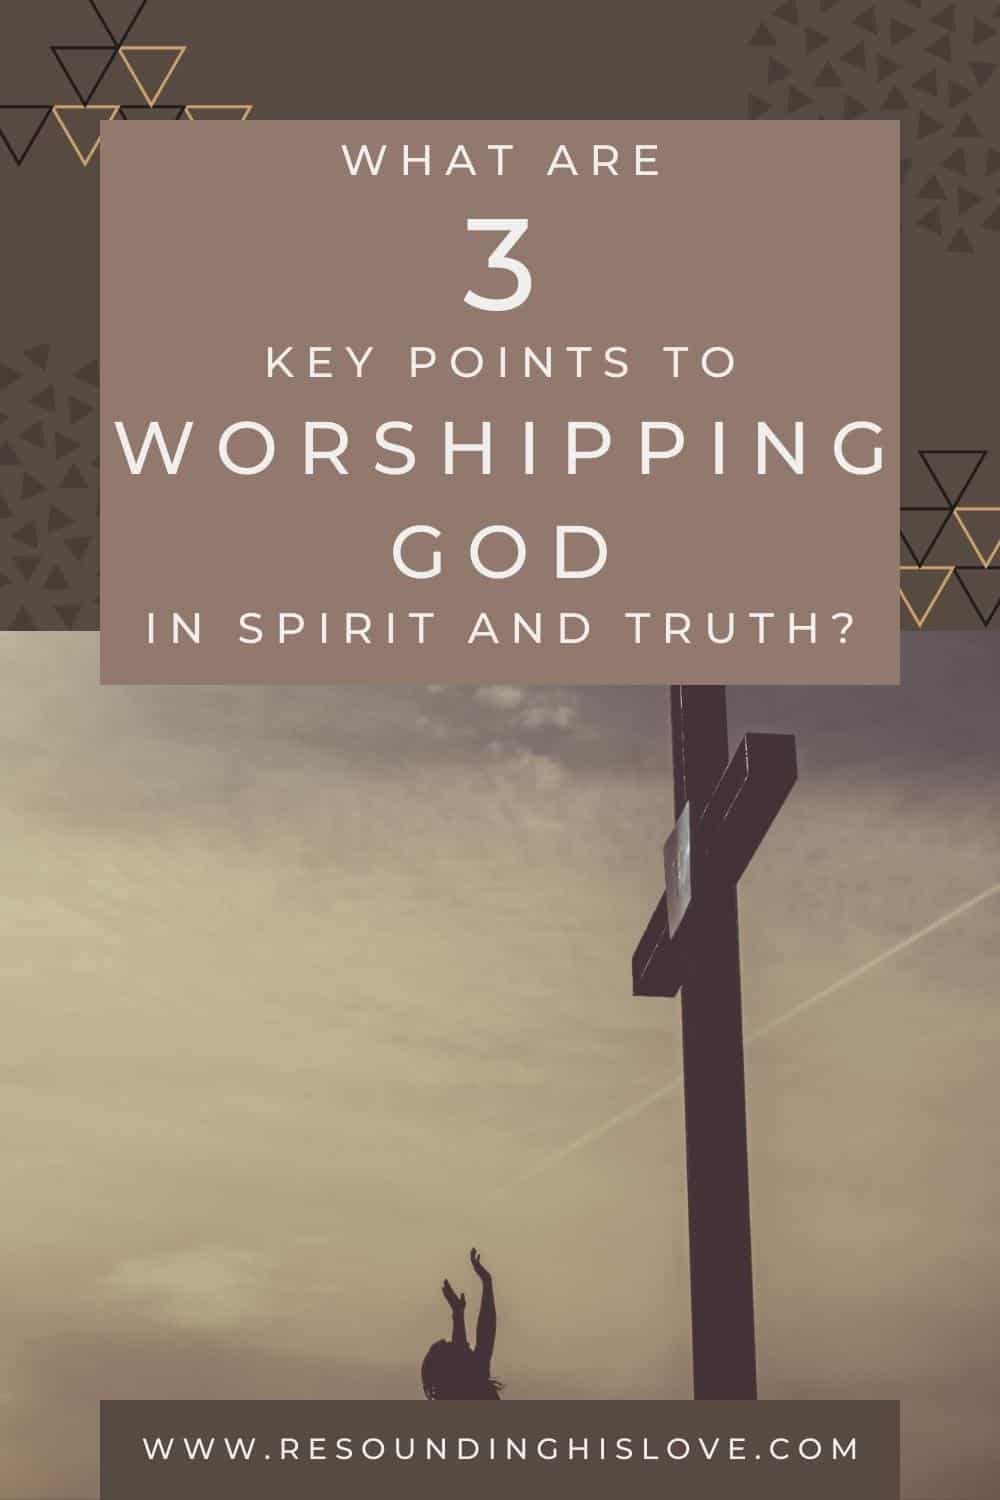 What Are 3 Key Points To Worship God In Spirit And Truth?